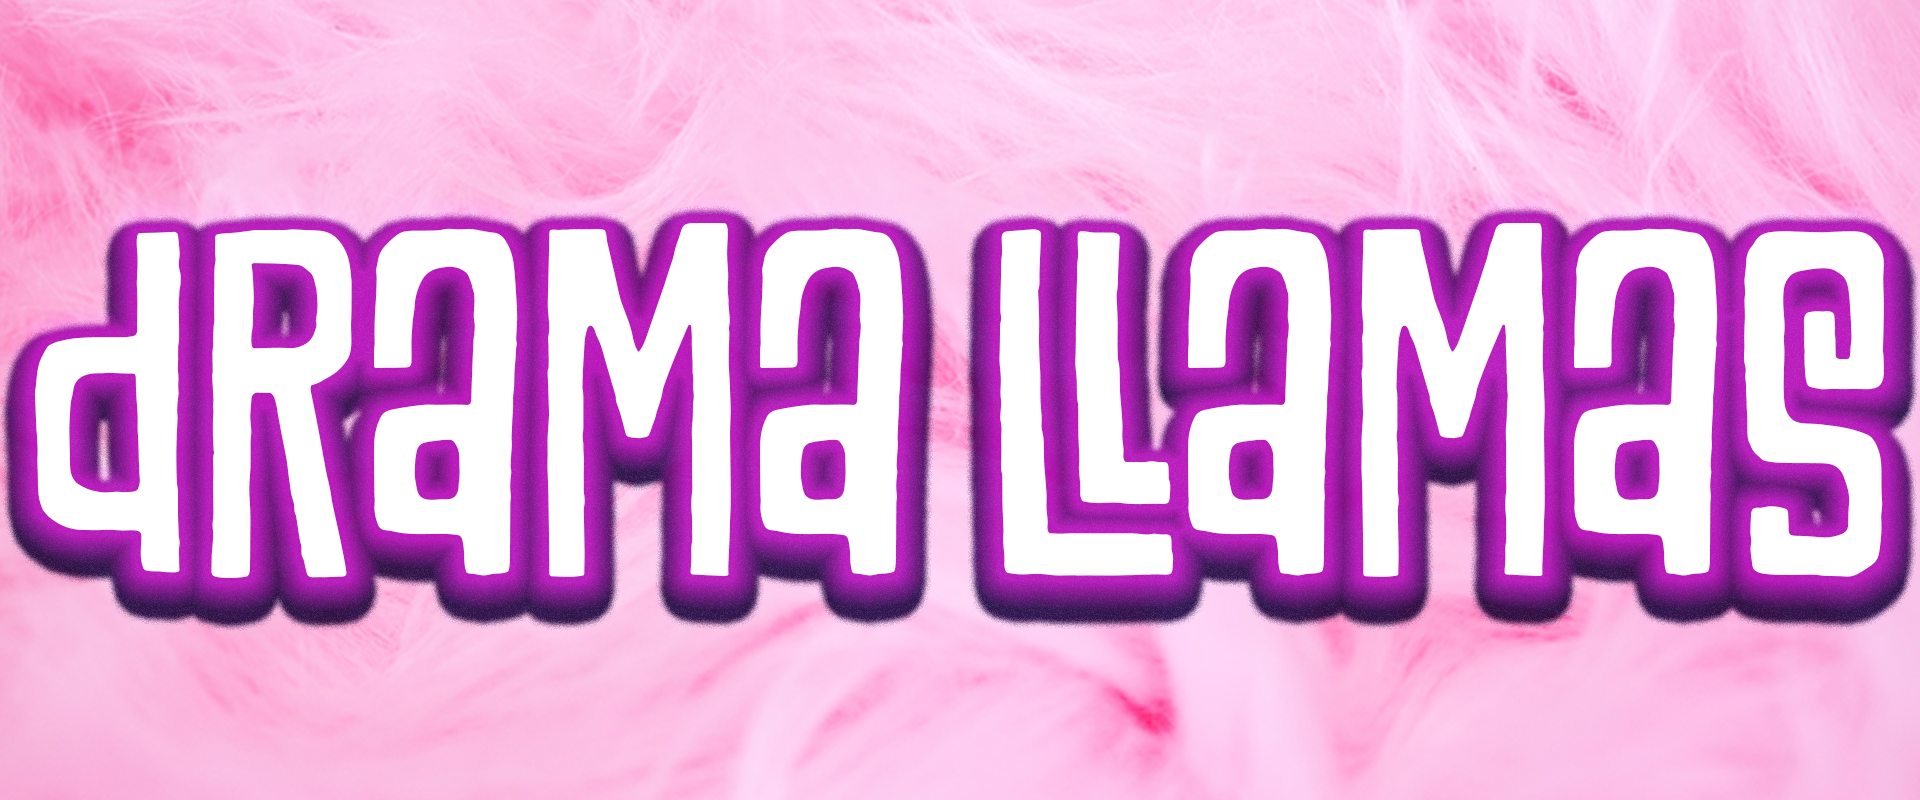 the words 'drama llamas' in a fun font on a pink fur background